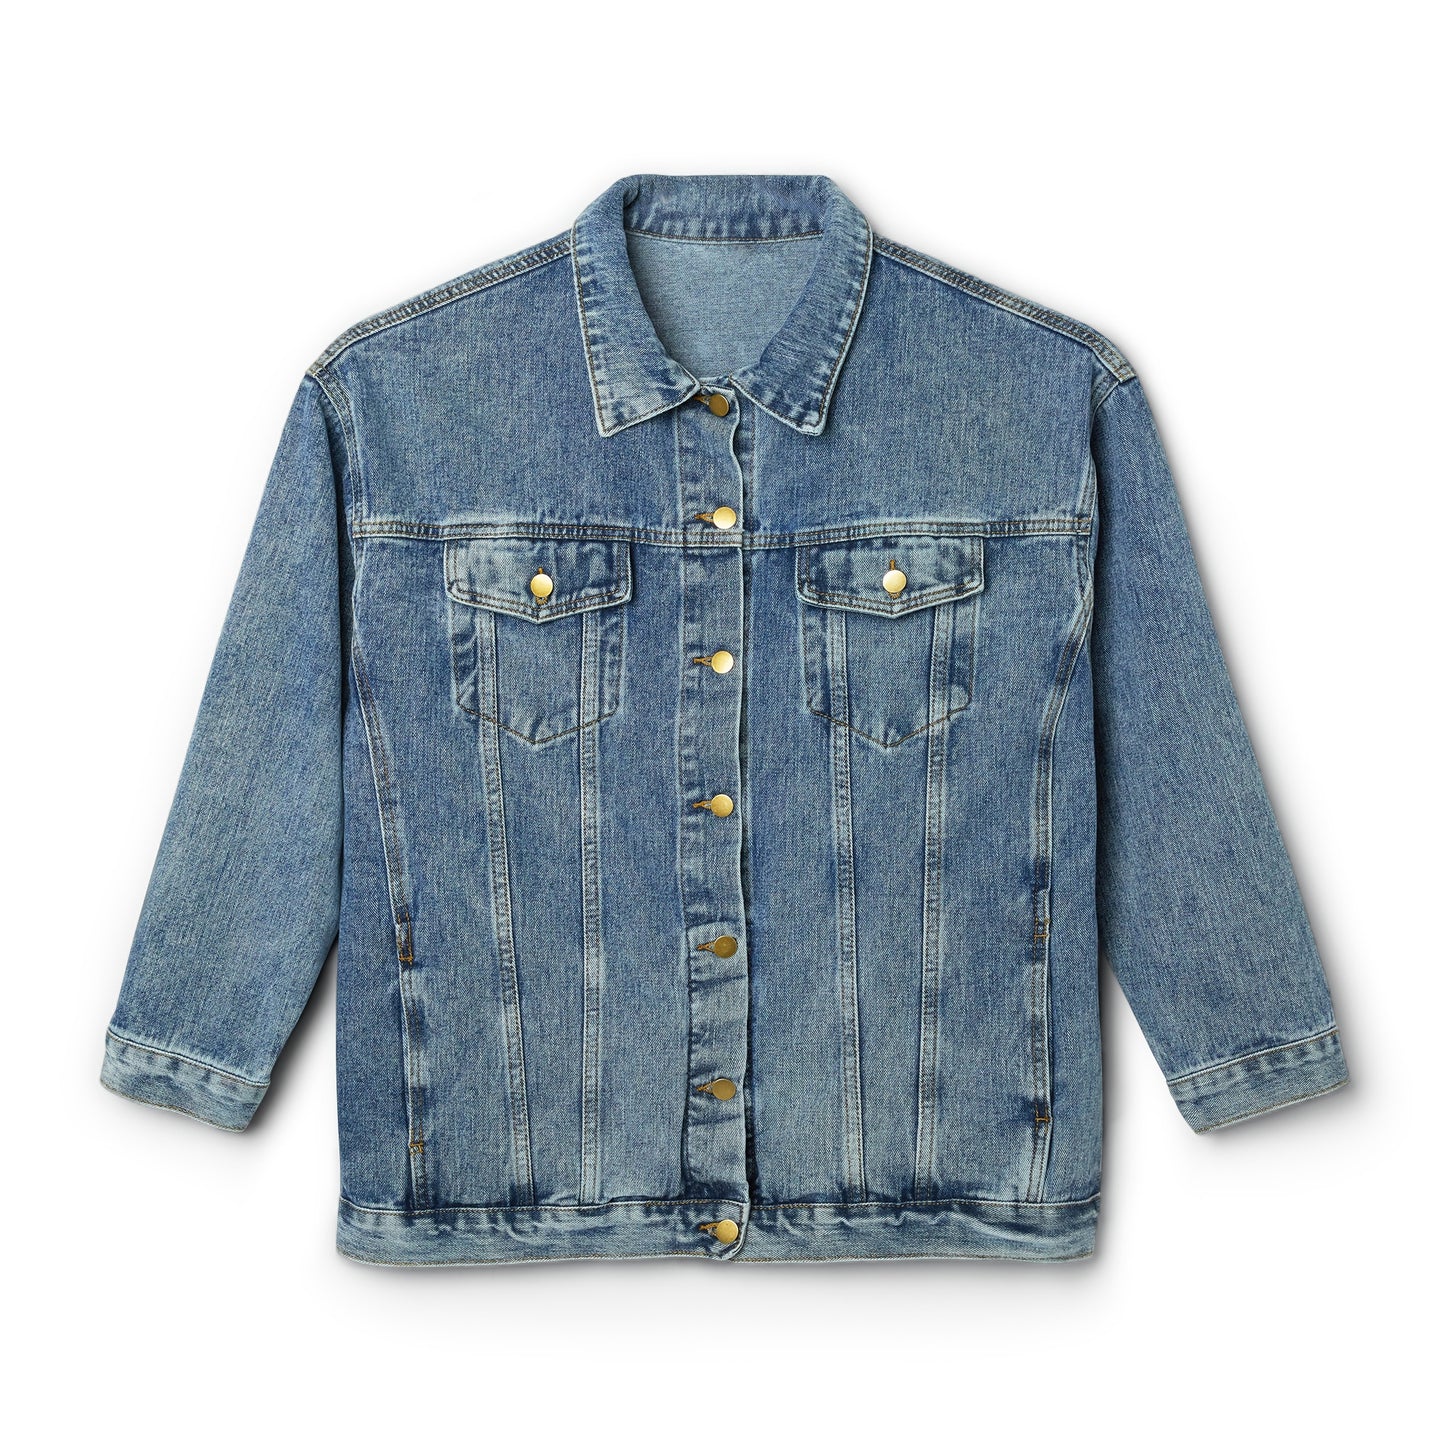 Printify Women's Surfer-Girl Denim Jacket laid out flat on a white background with button-front closure.